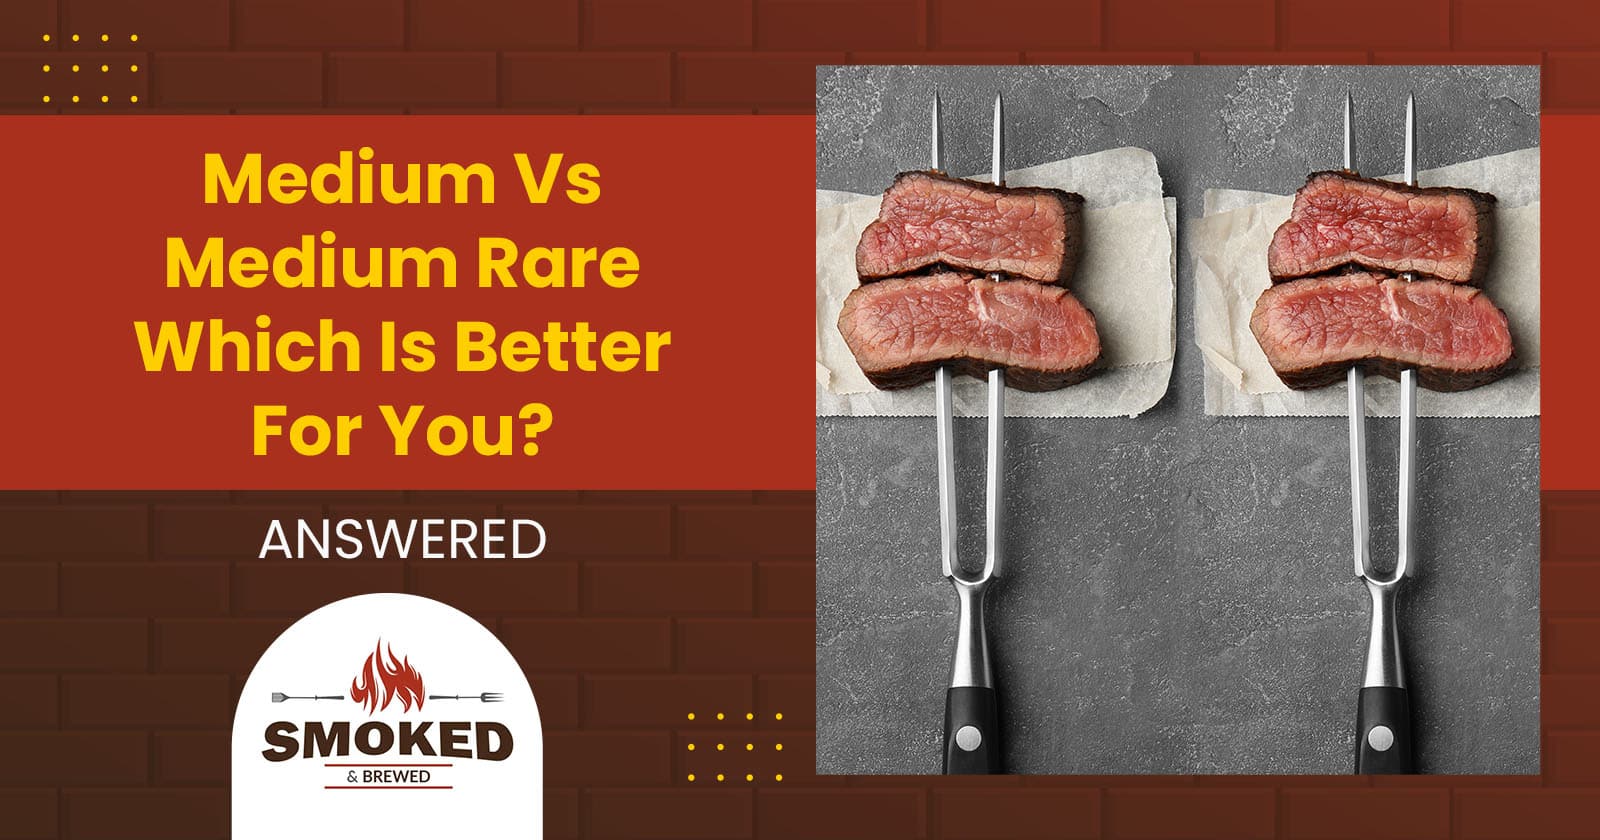 Why Medium Rare is Always the Perfect Steak Temperature – The Bearded  Butchers